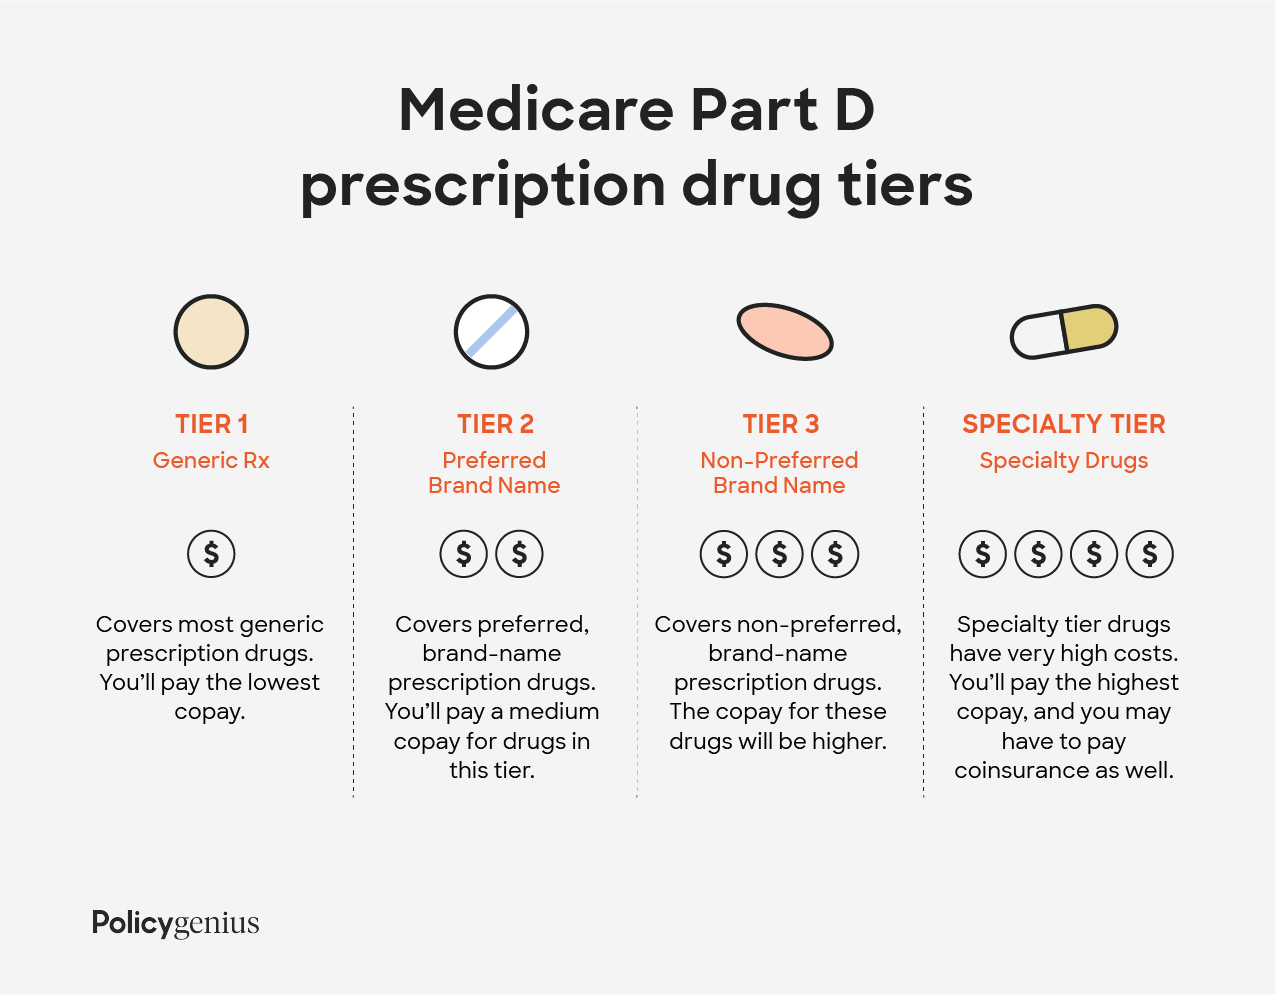 How Does A Medicare Part D Plan Work?